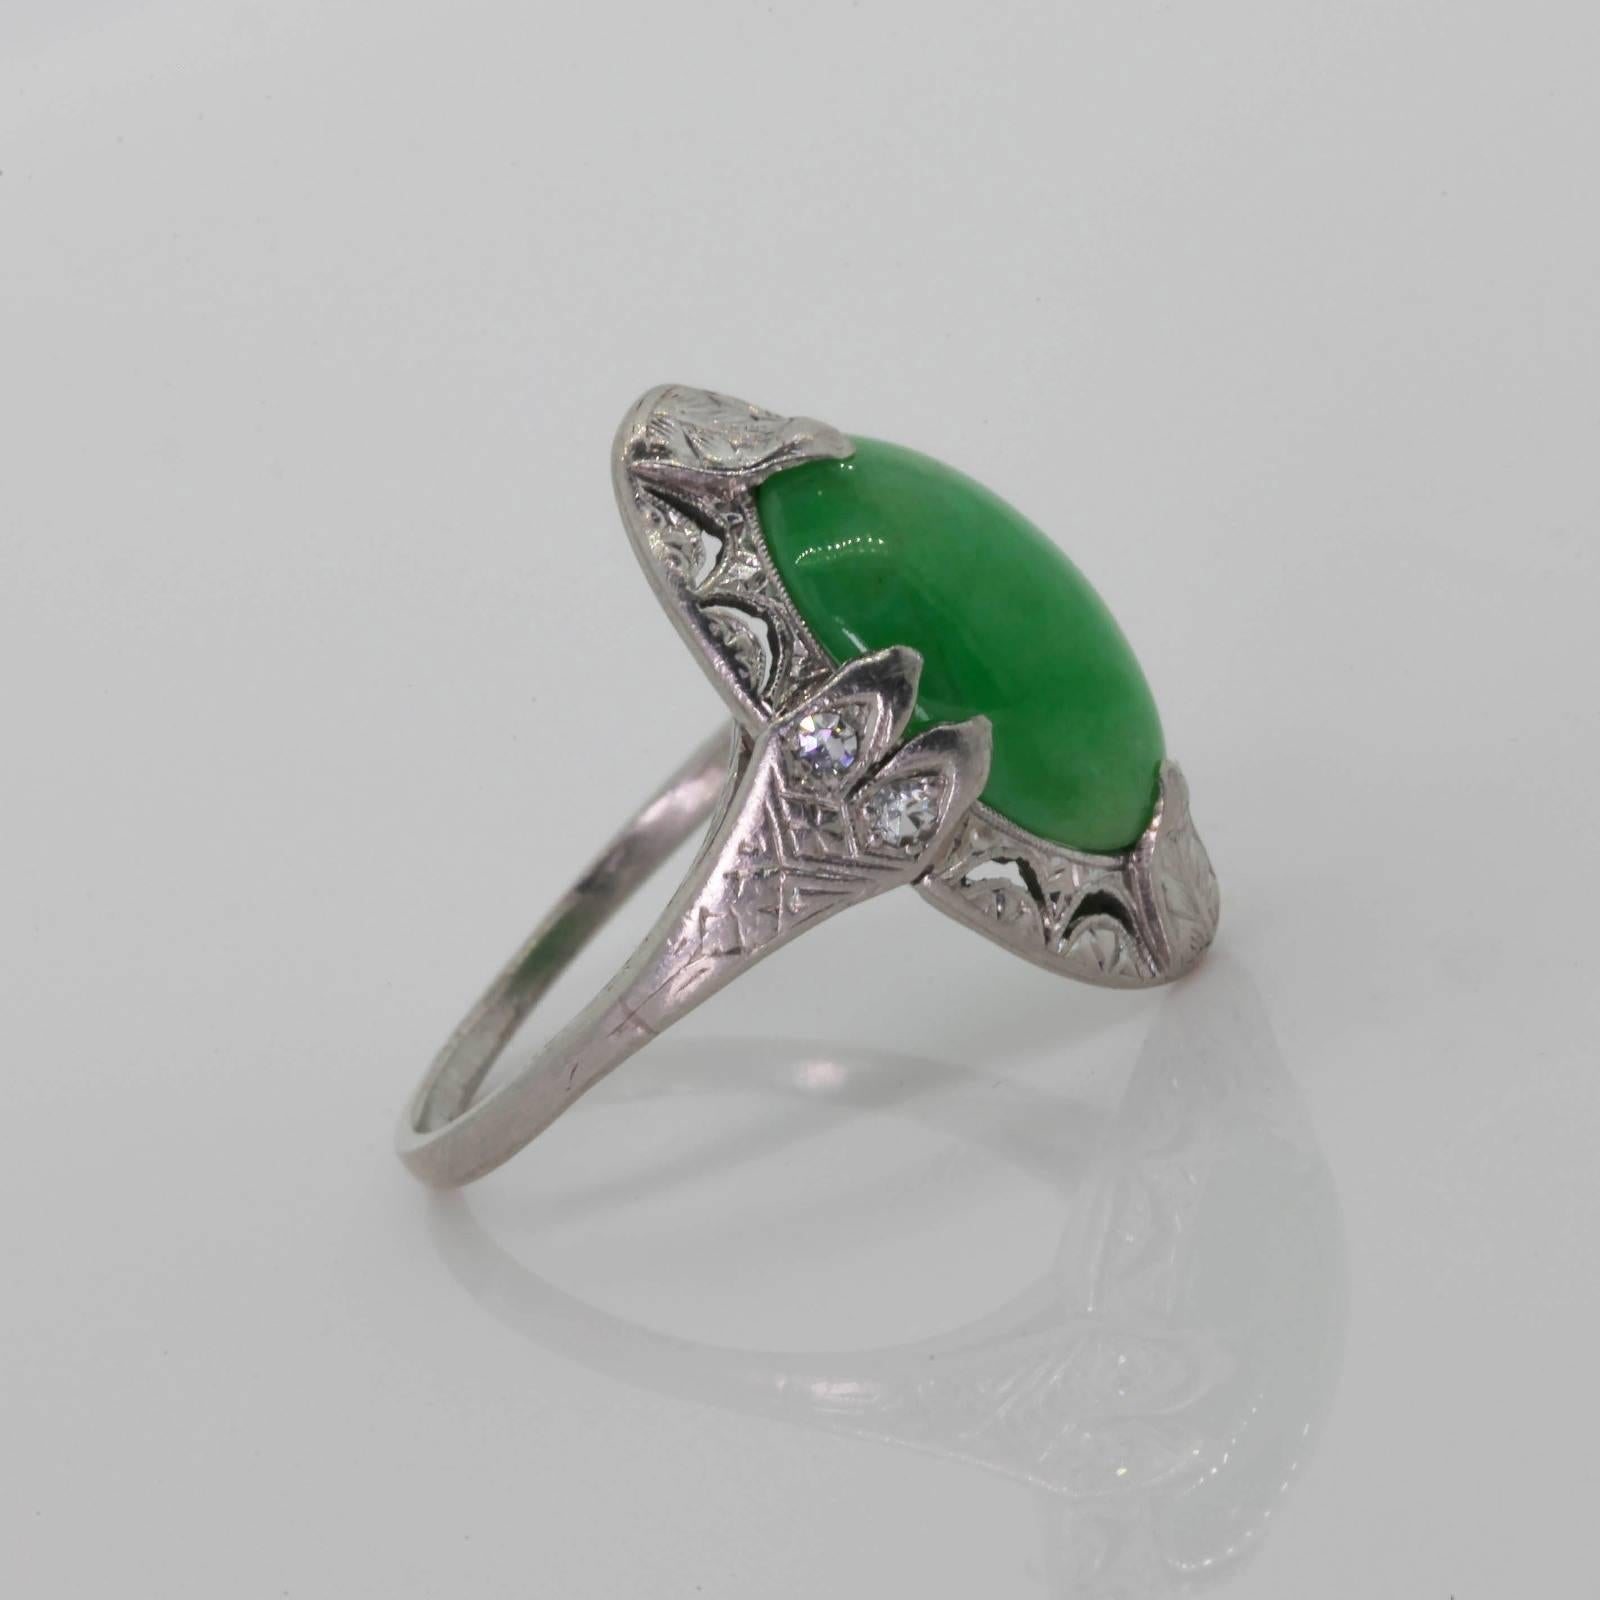 A coveted 1920s  North/South ring featuring an oval, cabochon lustrous Jadeite.  The setting is delicately designed with filigree and accented with two Single Cut Diamonds on each side.  Time worn engraving makes this beauty stand out! 